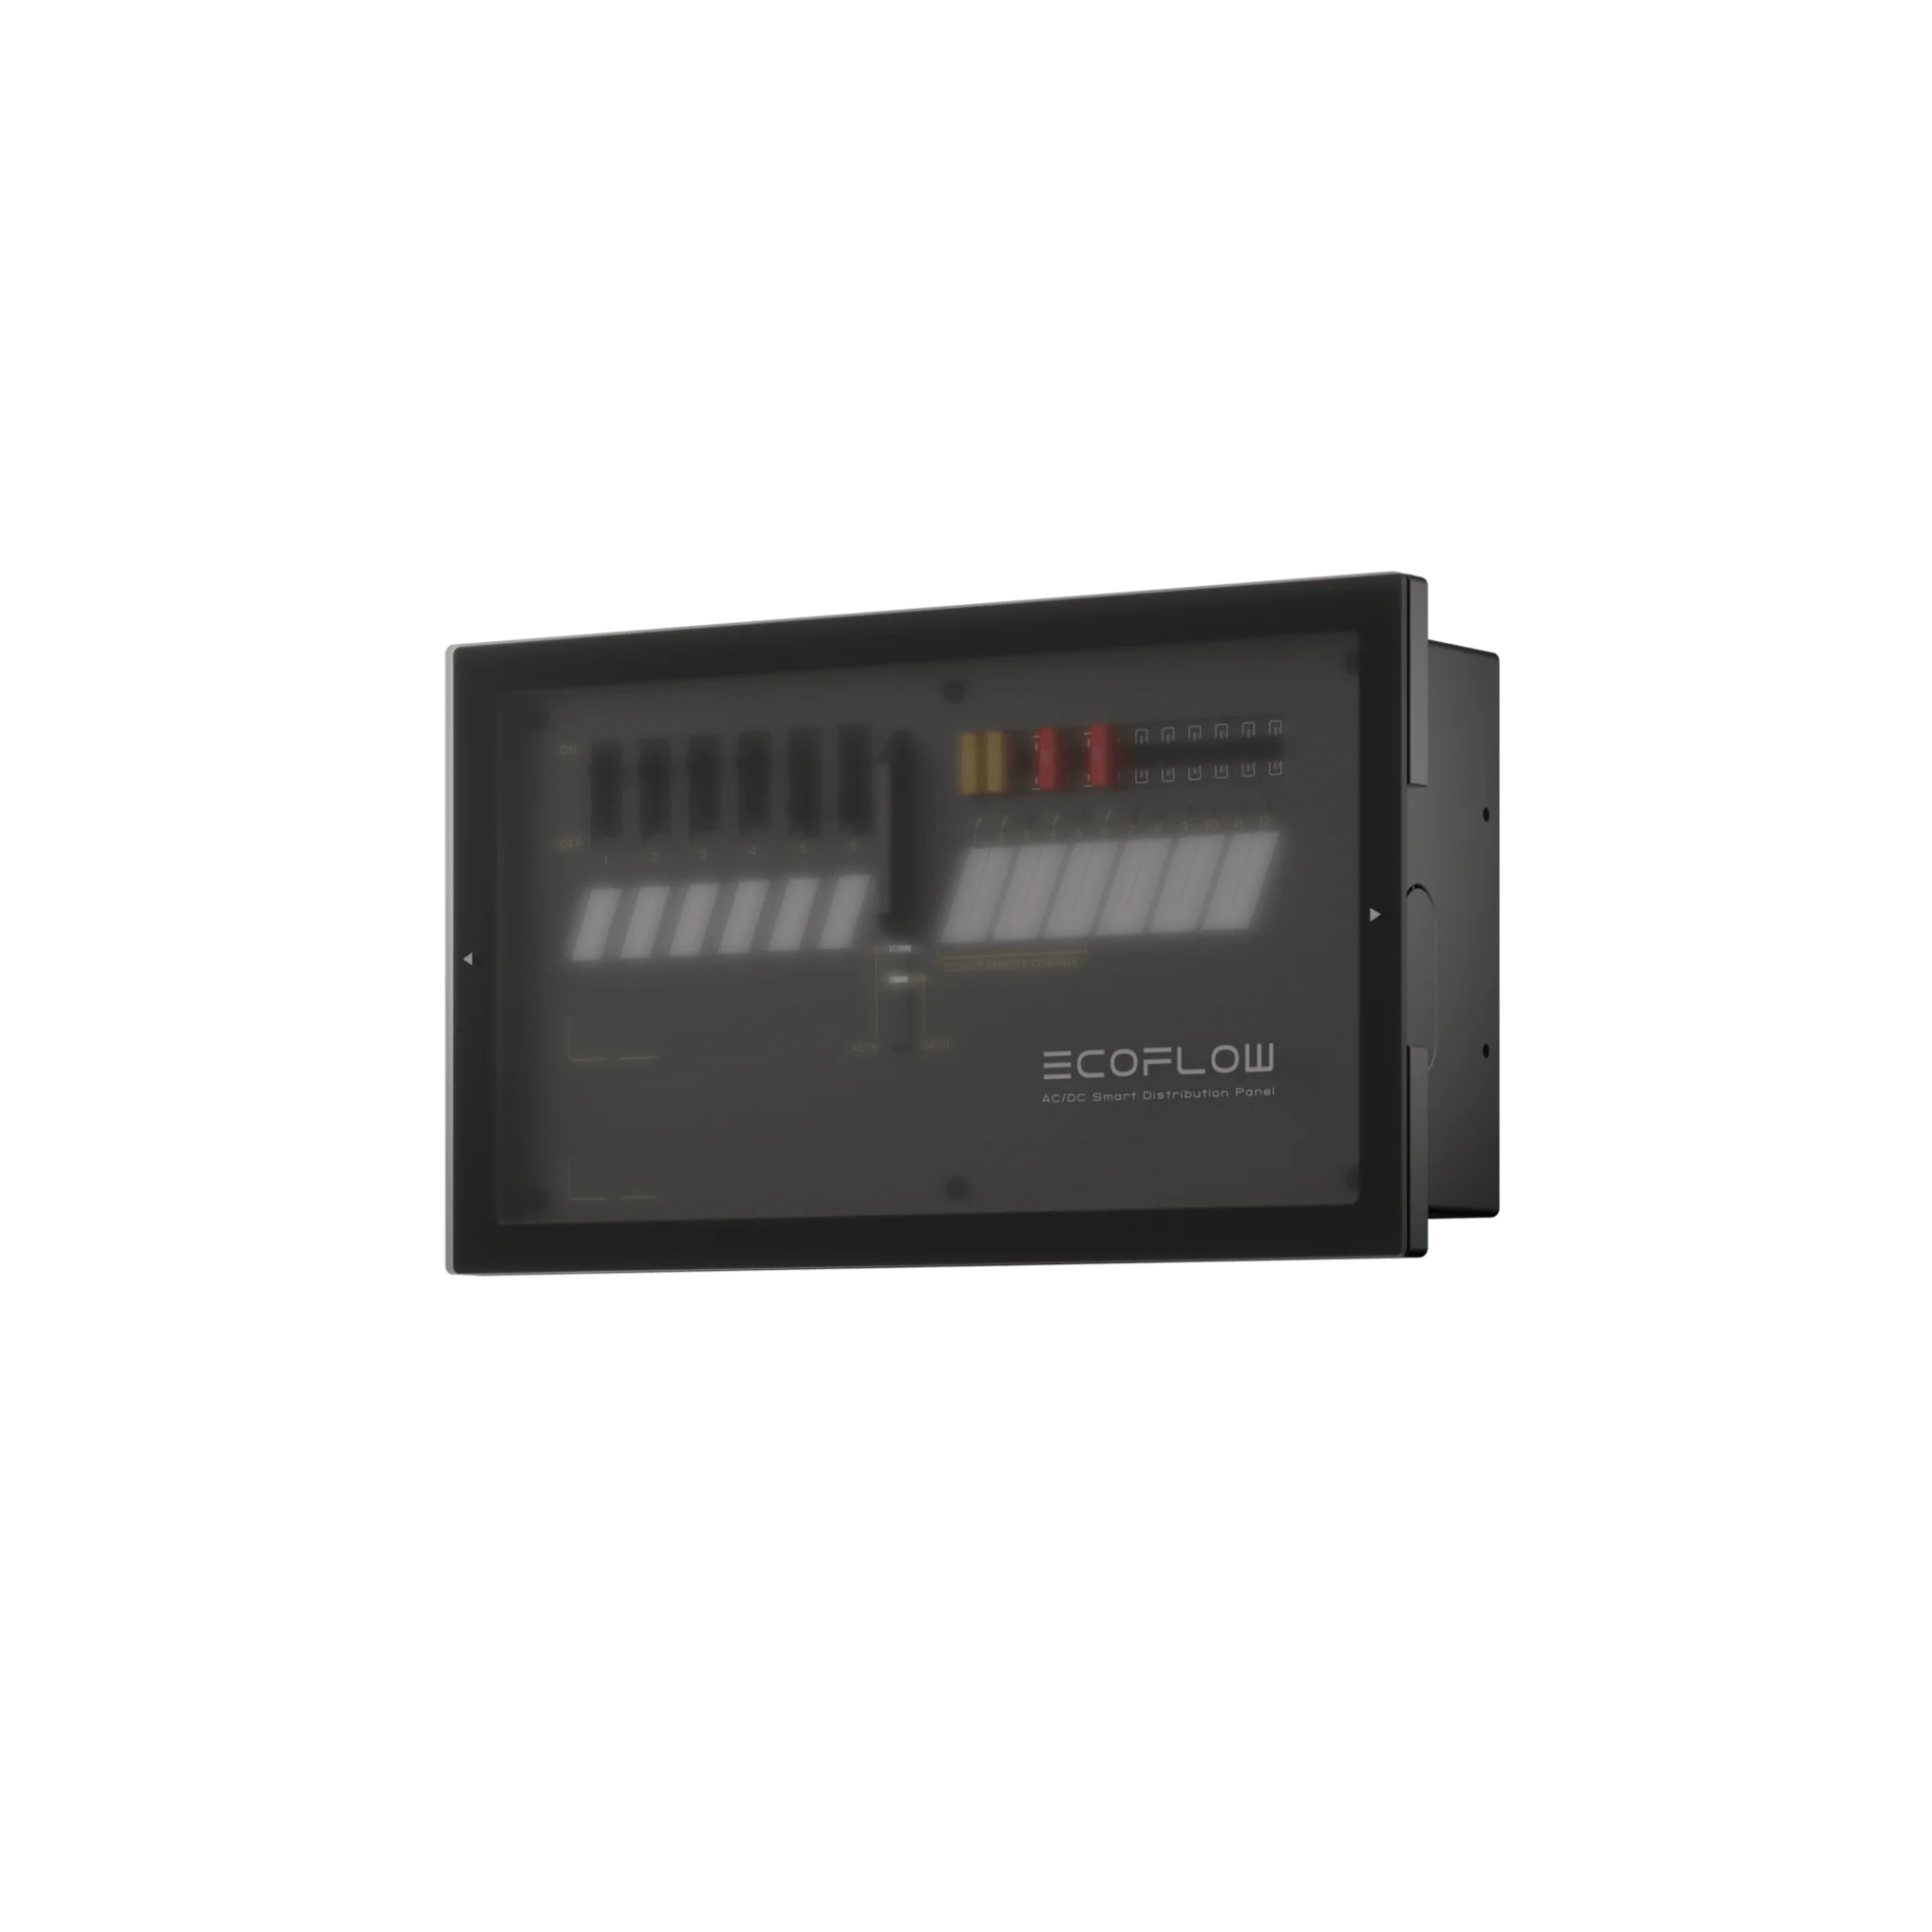 A black EcoFlow control panel with buttons.